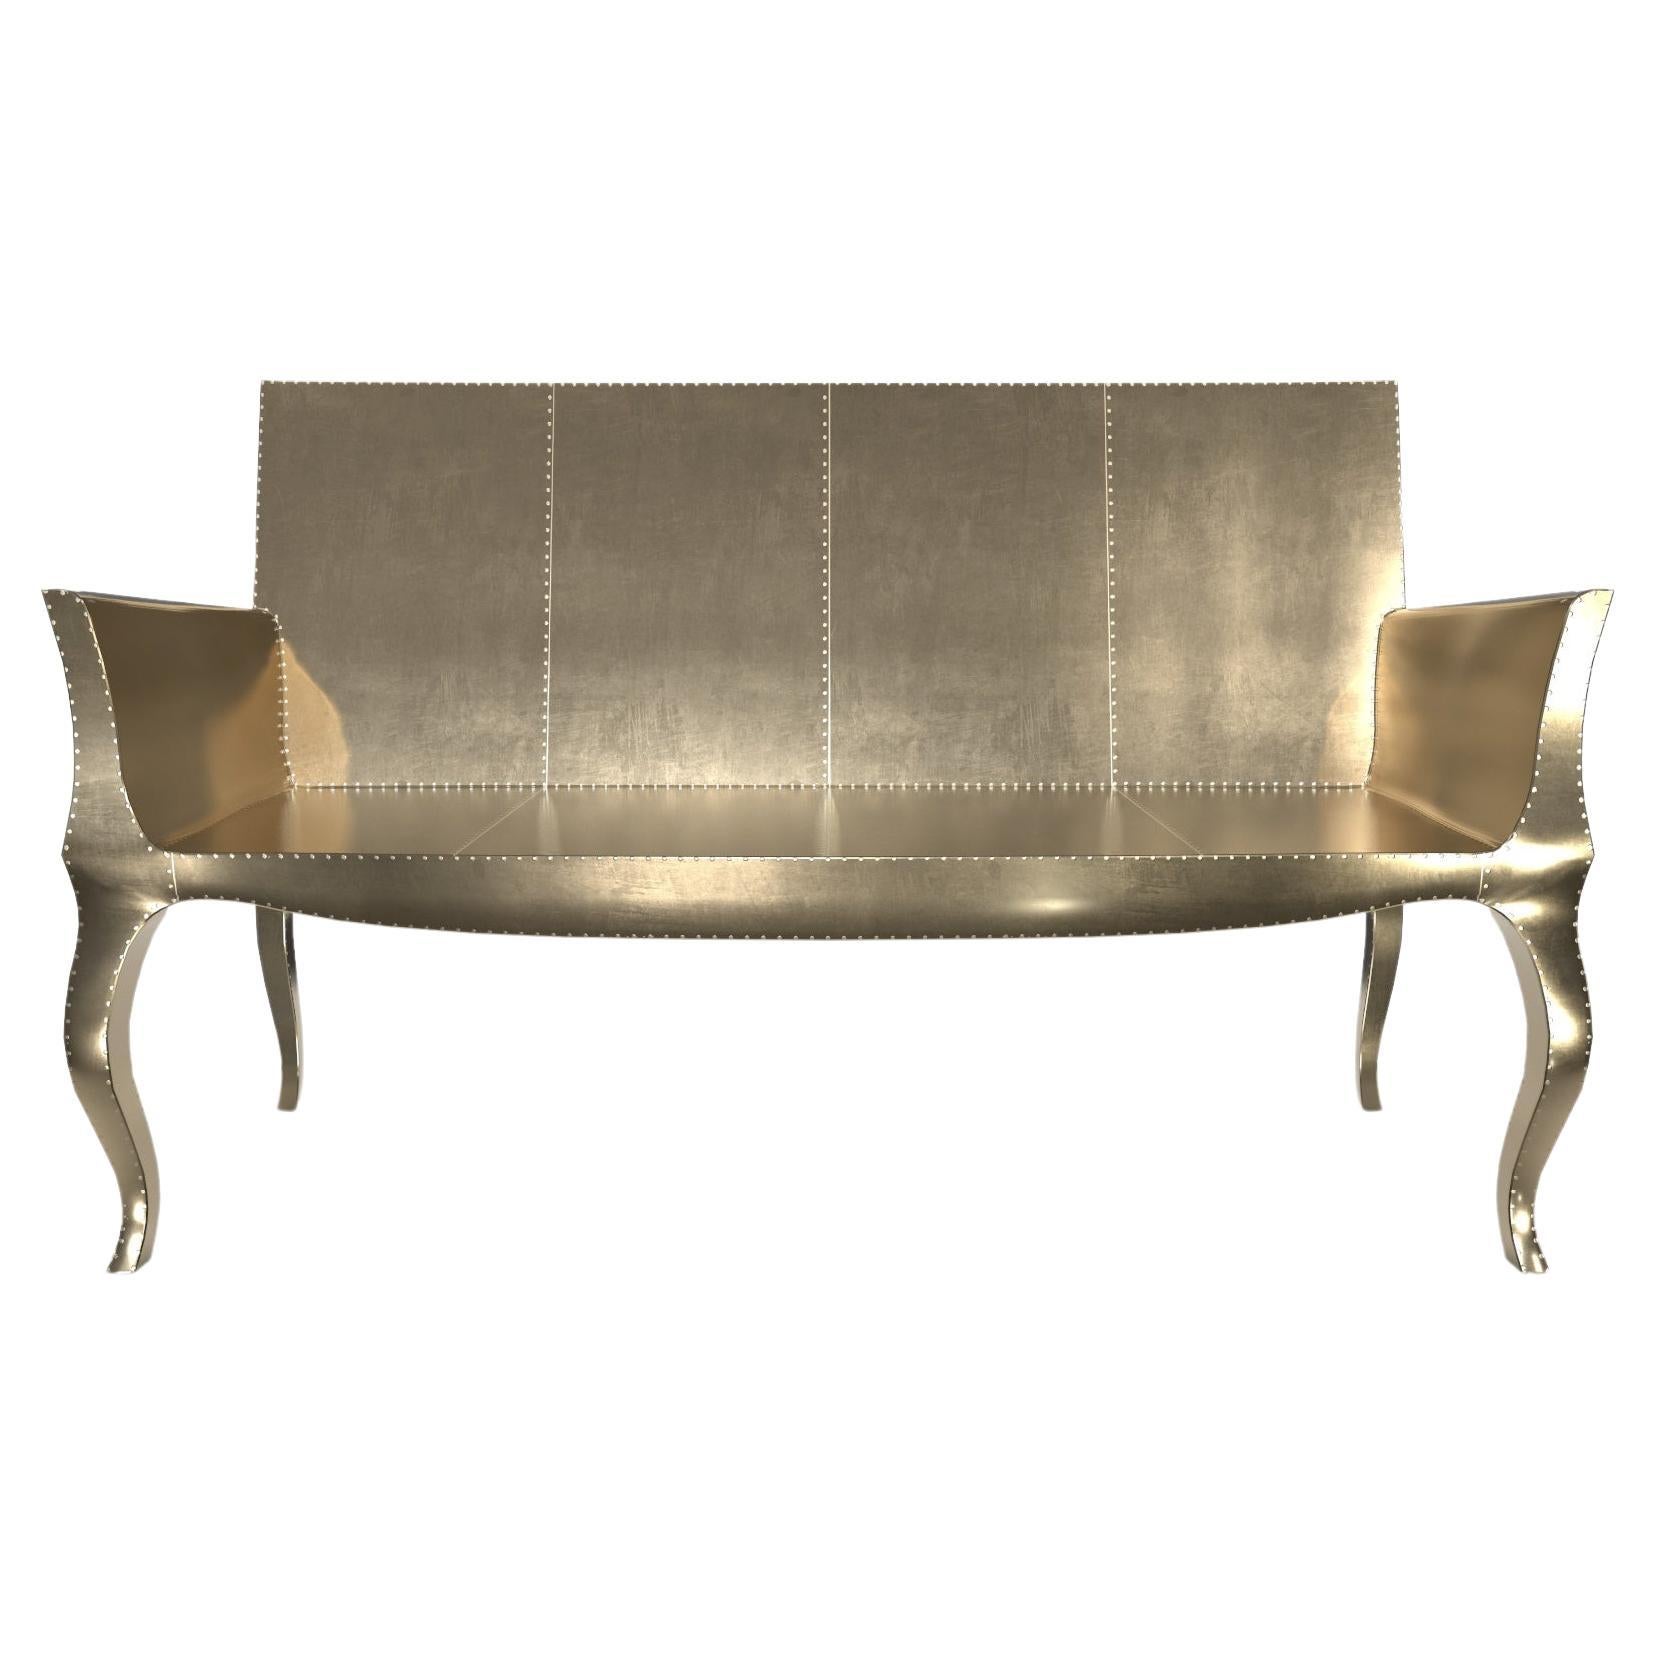 Louise Settee Art Deco Loveseats in Smooth Brass by Paul Mathieu